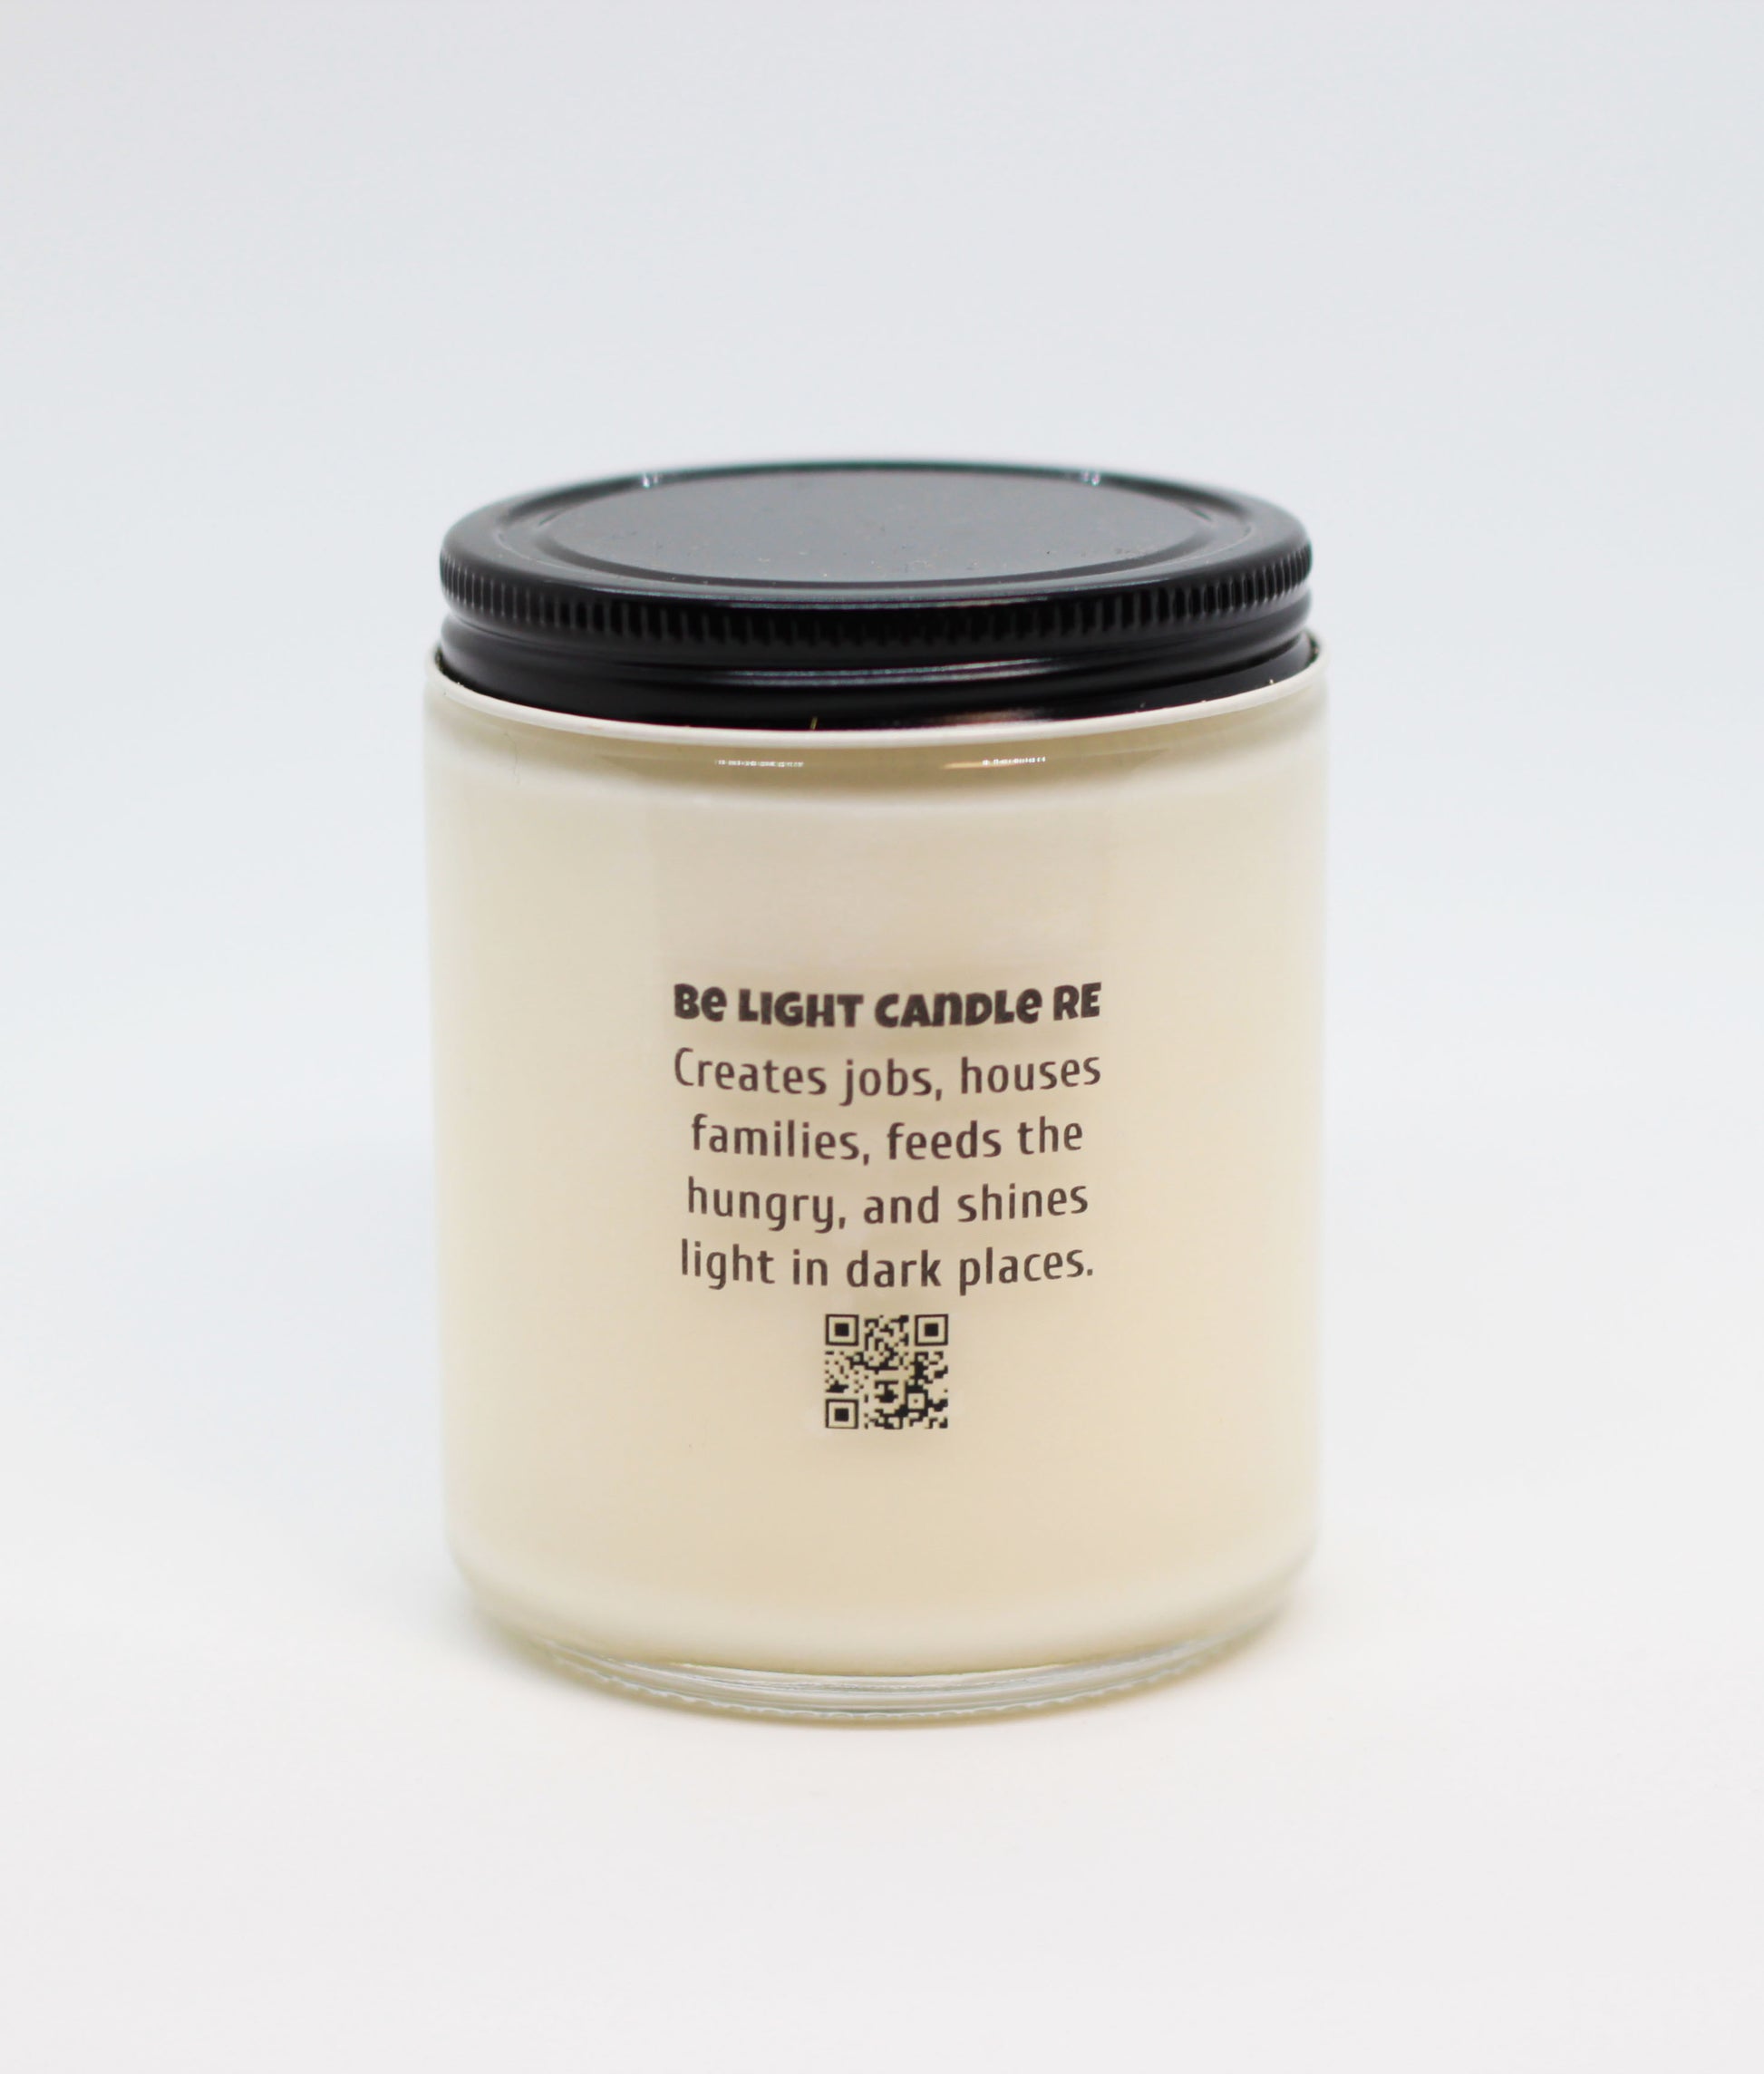 Scented candles, birthday candle, candle amazon, candle light, candles, candle, candles for men, scented candles amazon, odor eliminating candle